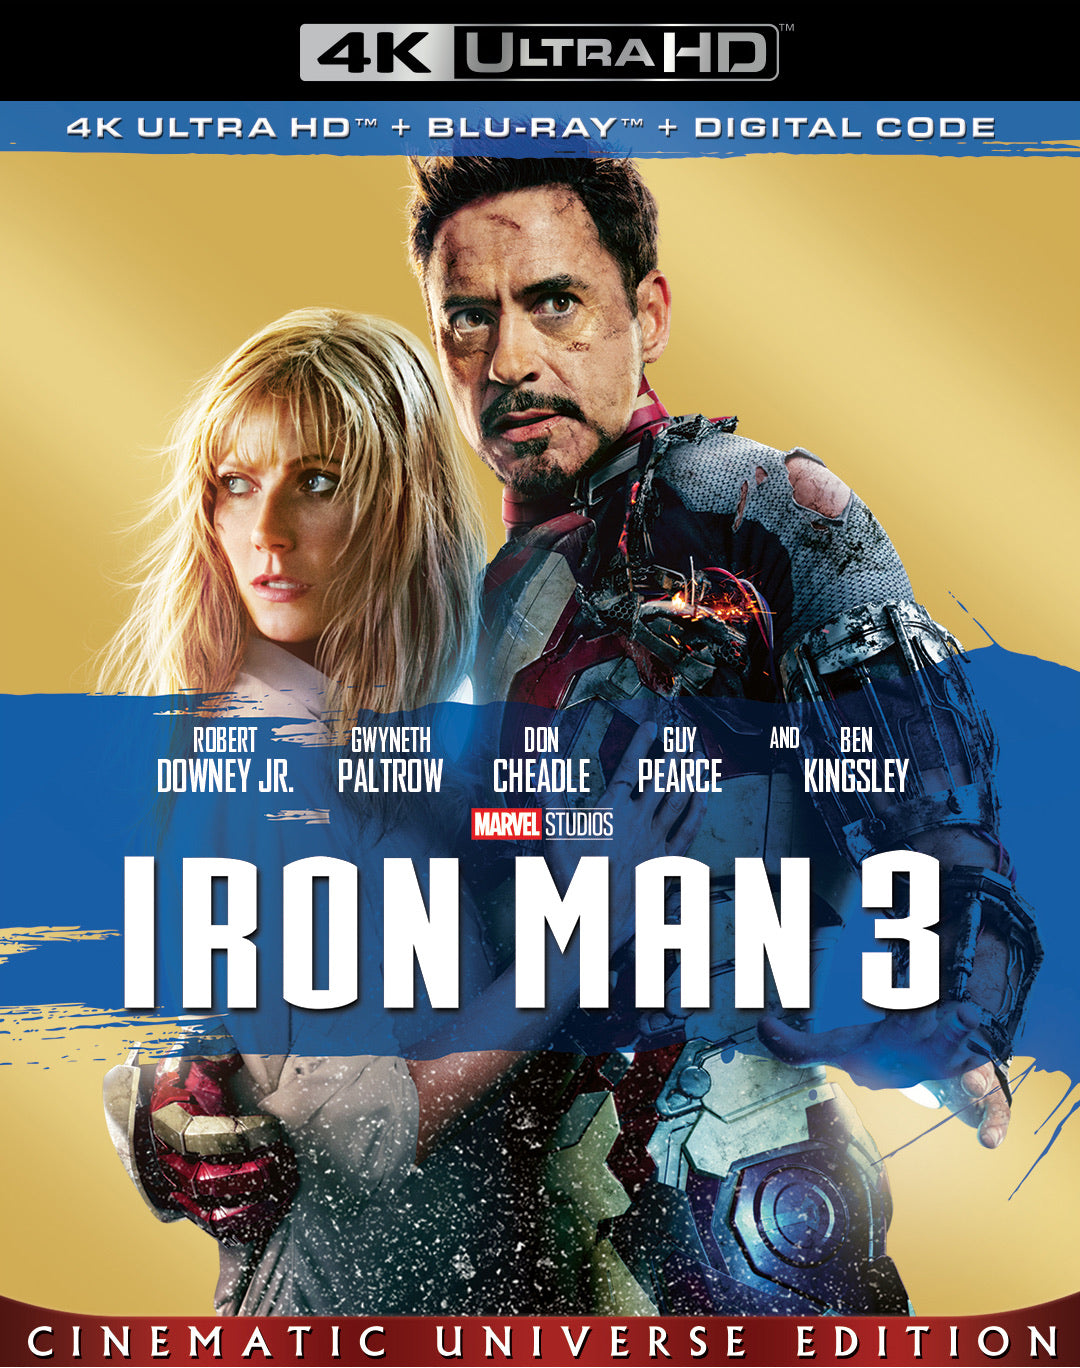 Iron Man 3 (2013) Vudu or Movies Anywhere 4K redemption only